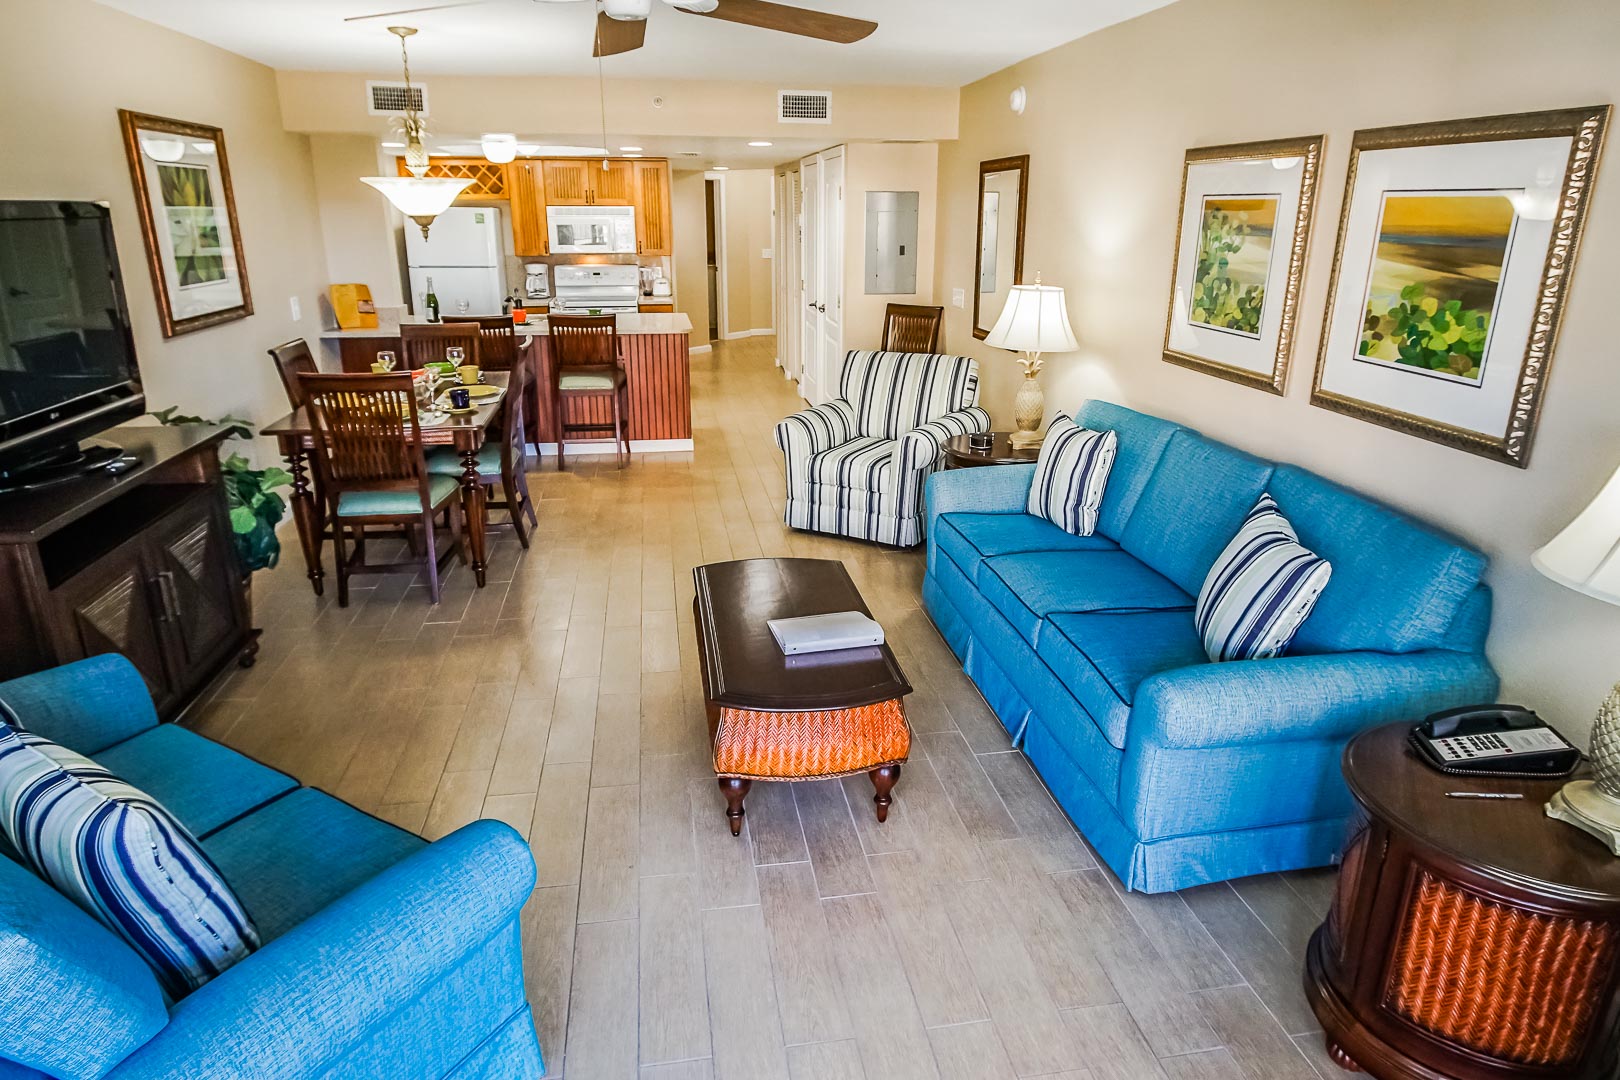 A spacious living room and dining area at VRI's The Resort on Cocoa Beach in Florida.